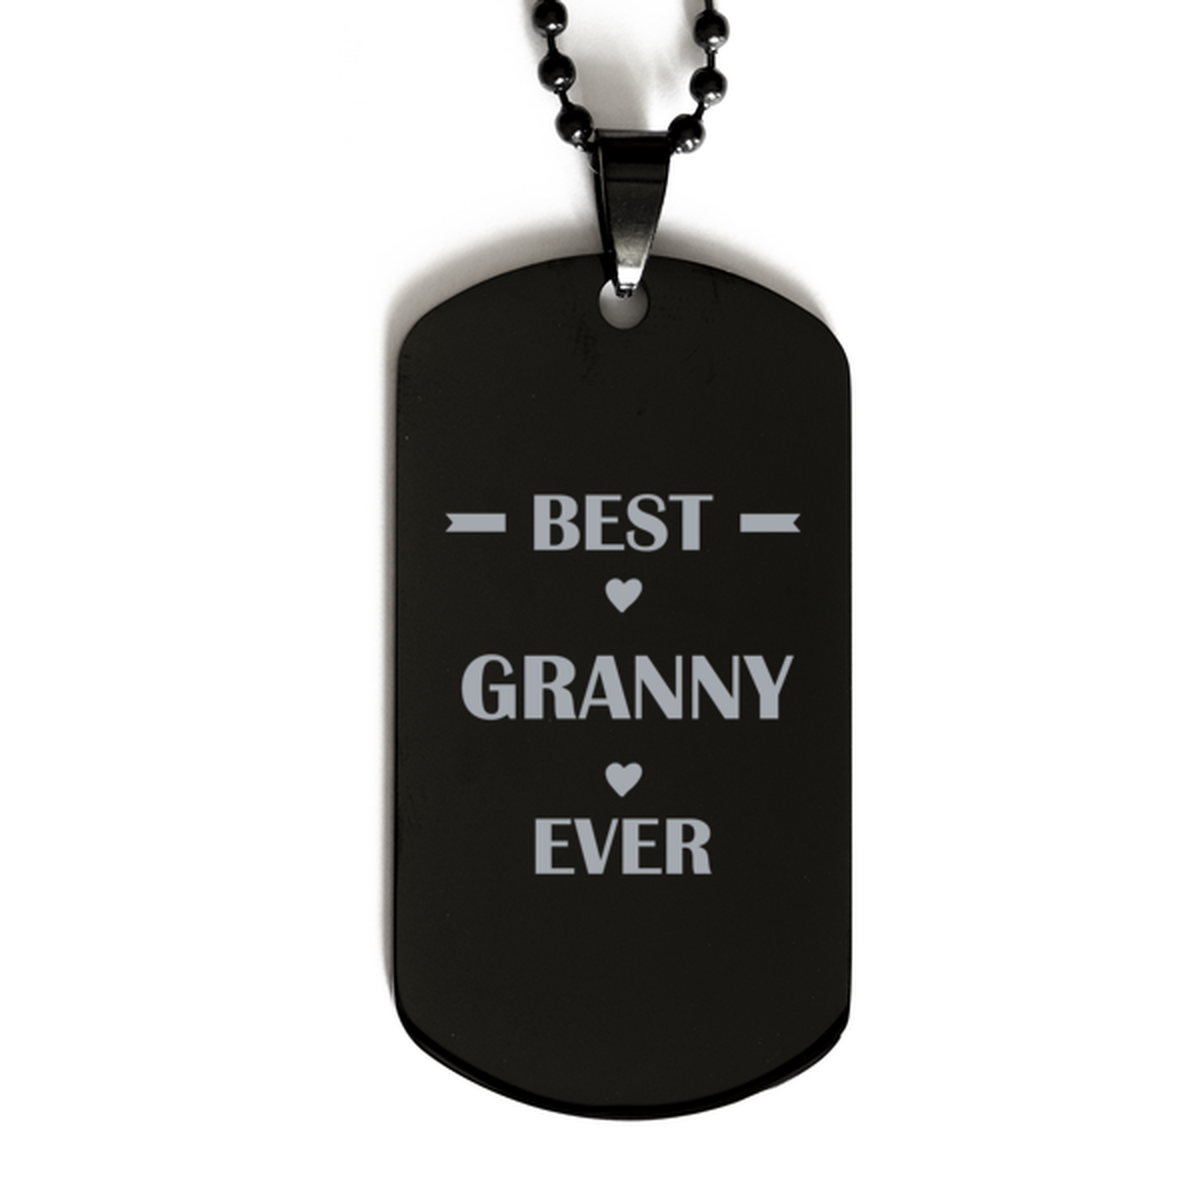 Best Granny Ever Granny Gifts, Funny Black Dog Tag For Granny, Birthday Family Presents Engraved Necklace For Women